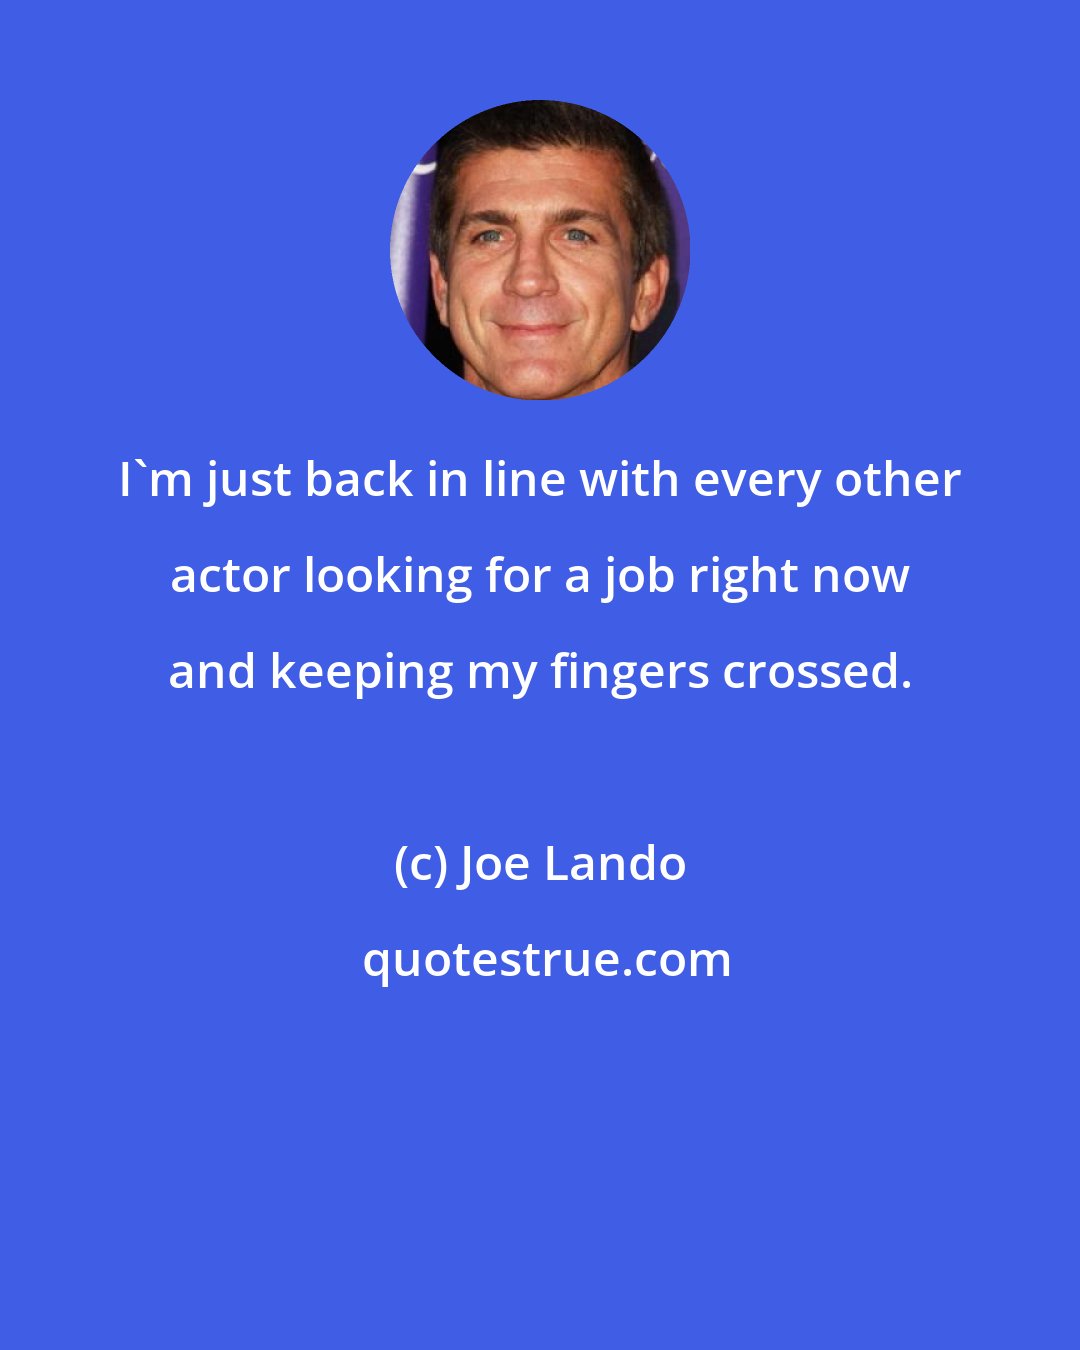 Joe Lando: I'm just back in line with every other actor looking for a job right now and keeping my fingers crossed.